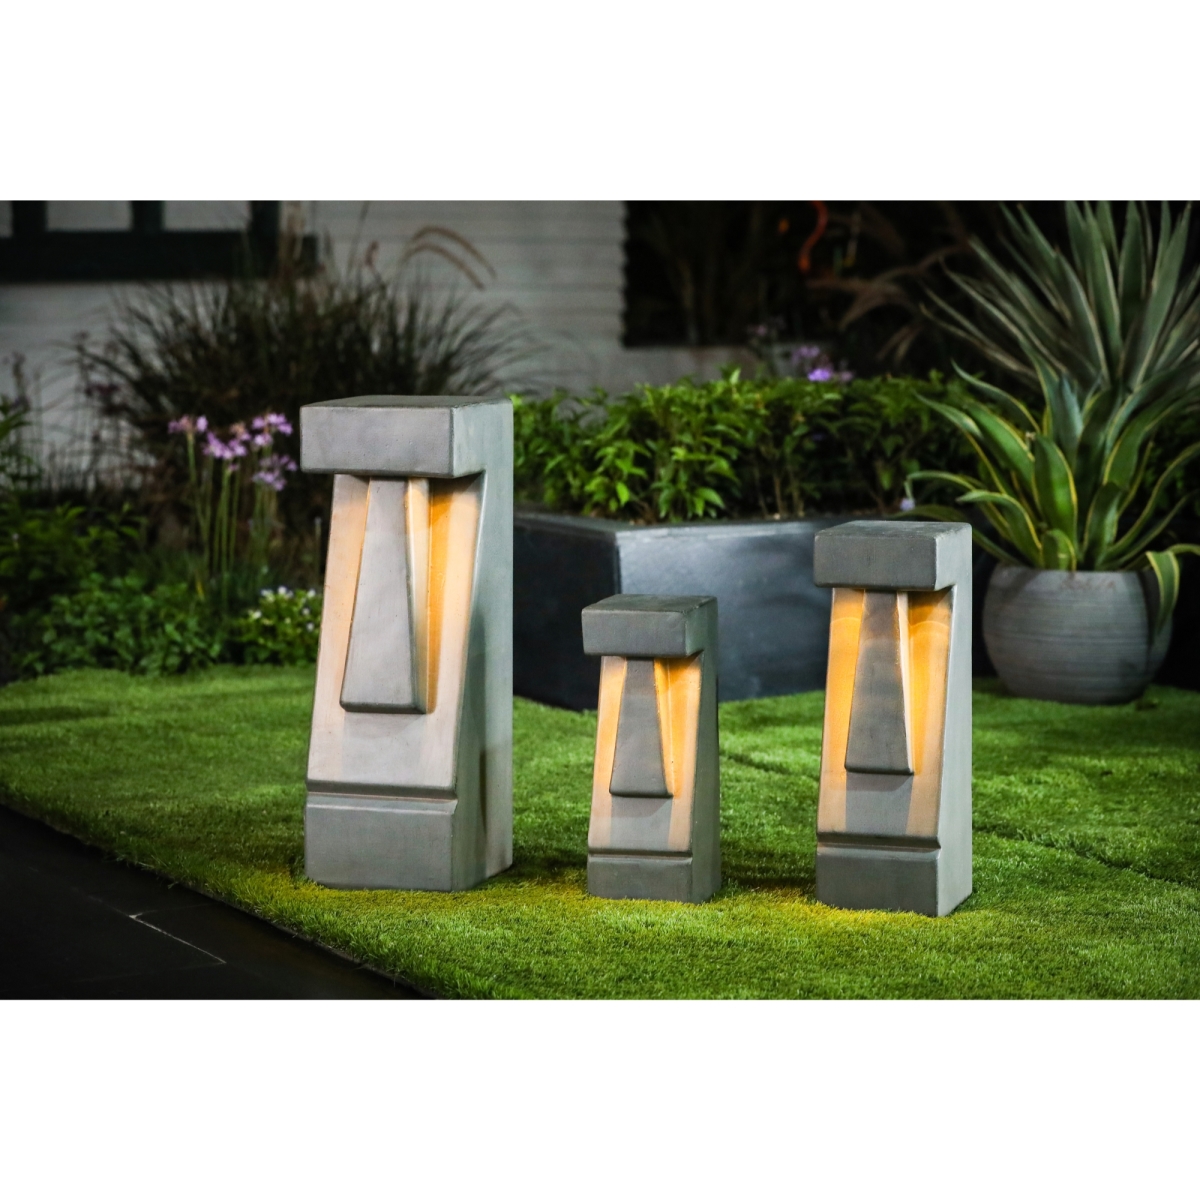 Picture of Luxen Home Cement 14.25in.H Easter Island Tiki LED Solar Bollard Light